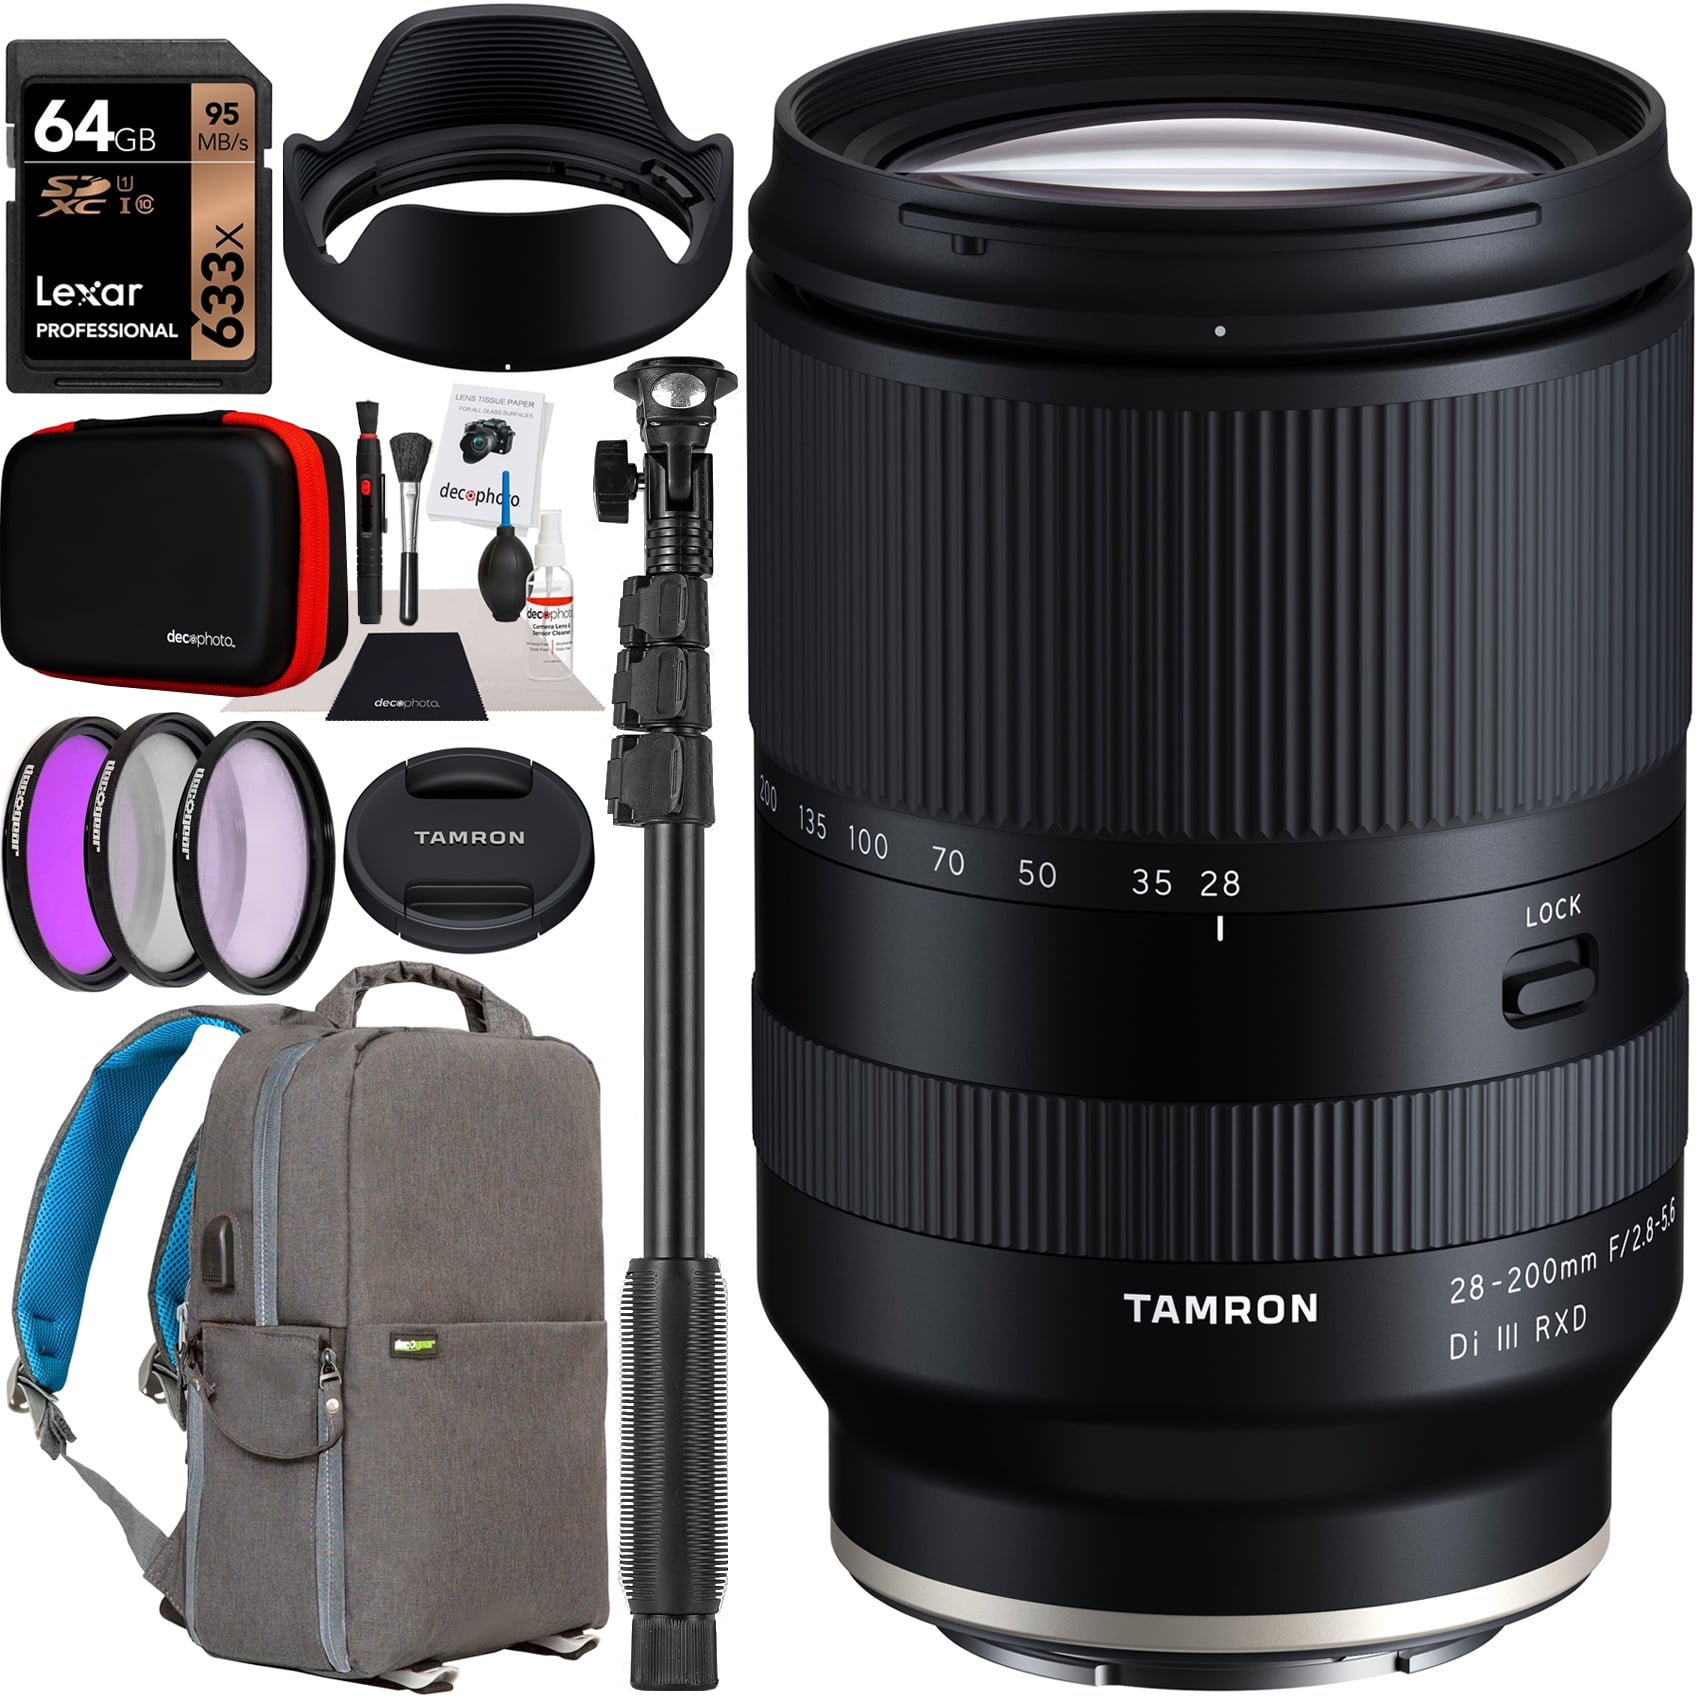 Tamron 28-200mm F/2.8-5.6 Di III RXD Lens Model A071 for Sony E-Mount Full  Frame Mirrorless Cameras Bundle with Deco Gear Photography Backpack Case +  Filter Kit + 64GB Card + Monopod +